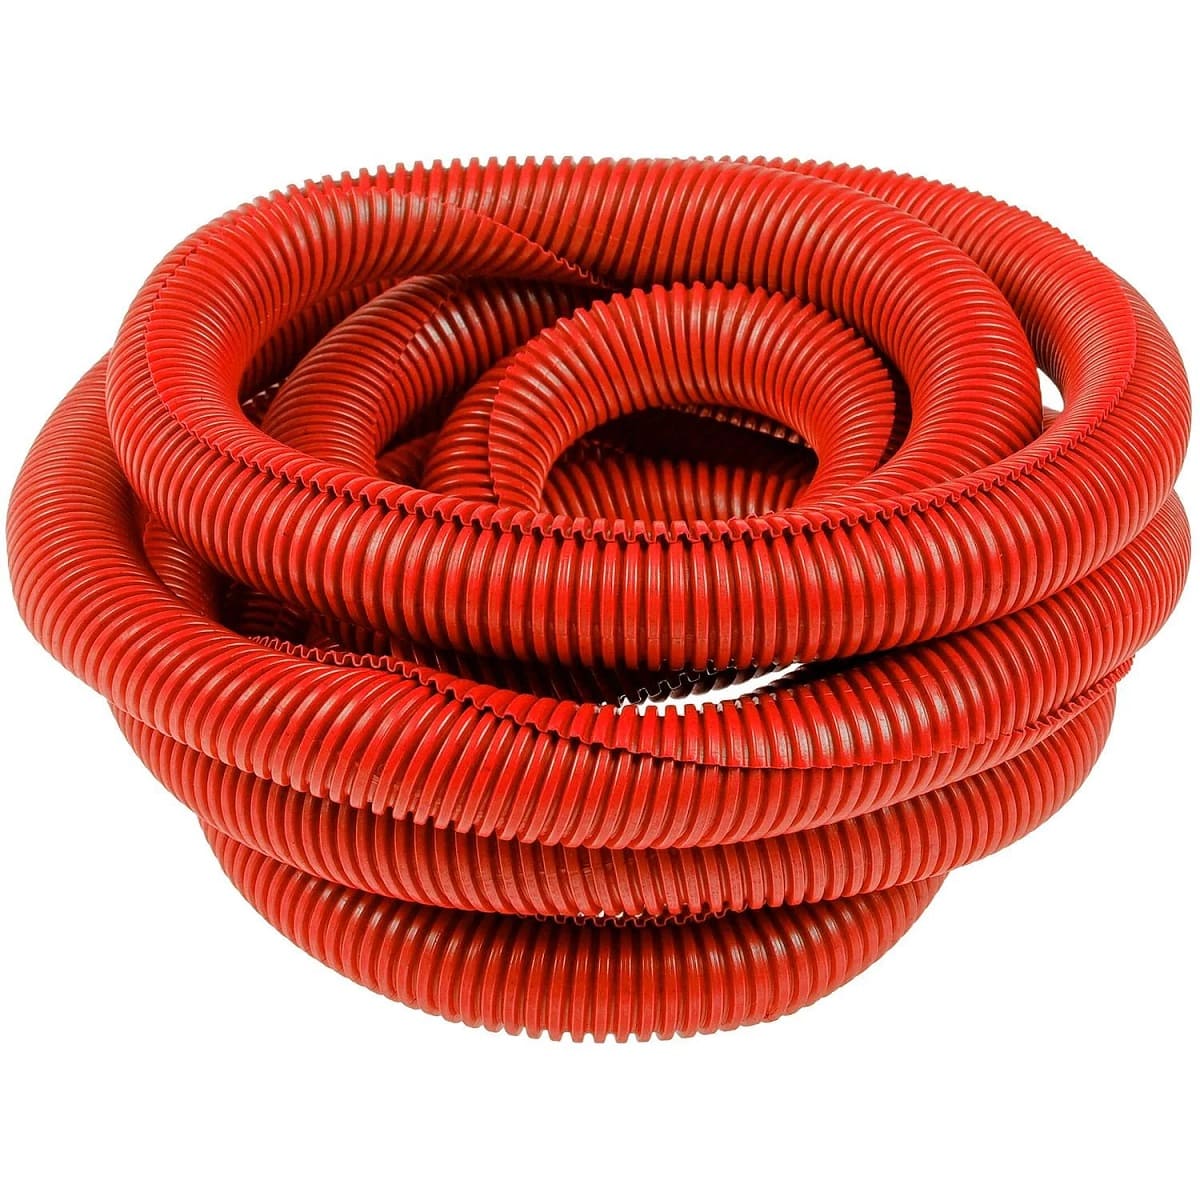 What Is Red Conduit Used For